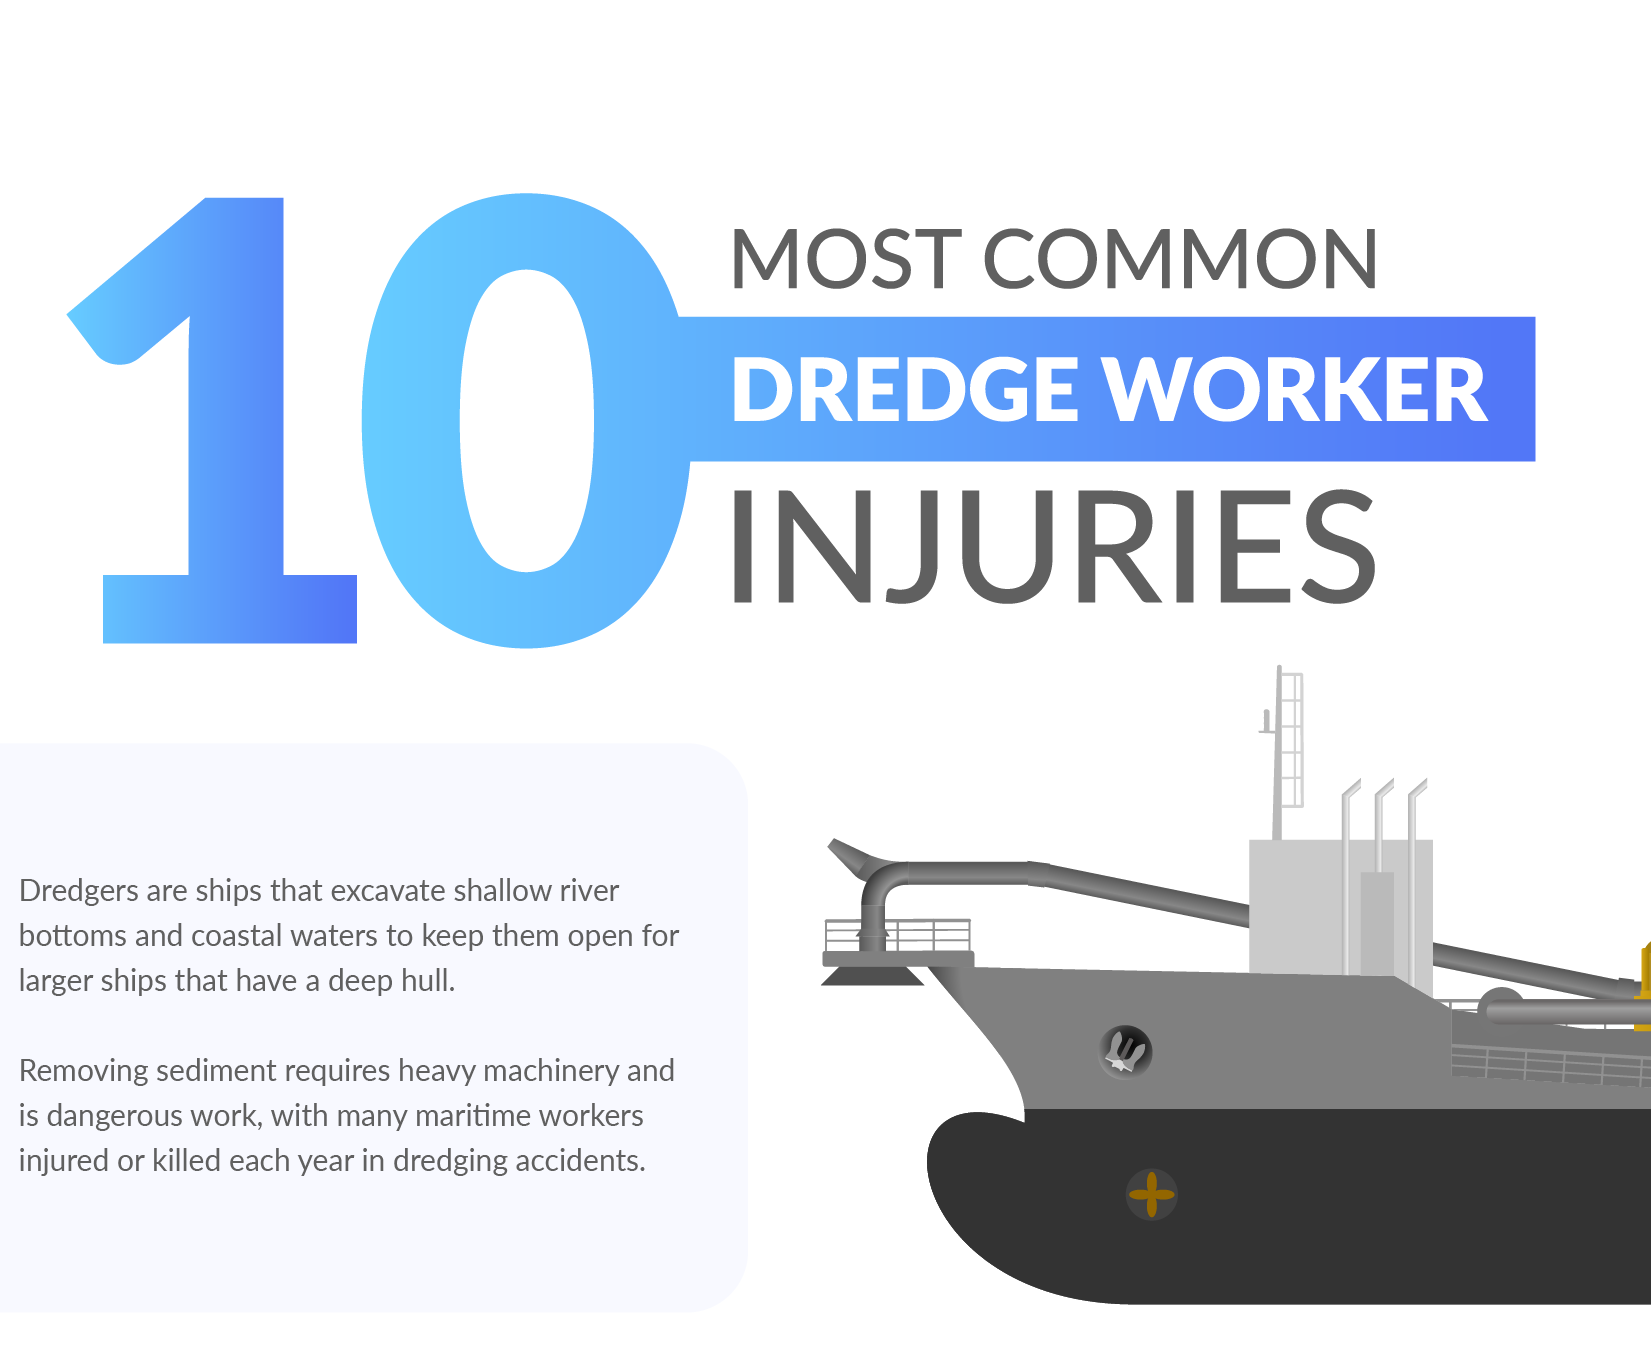 Common Dredge Worker Injuries Infographic